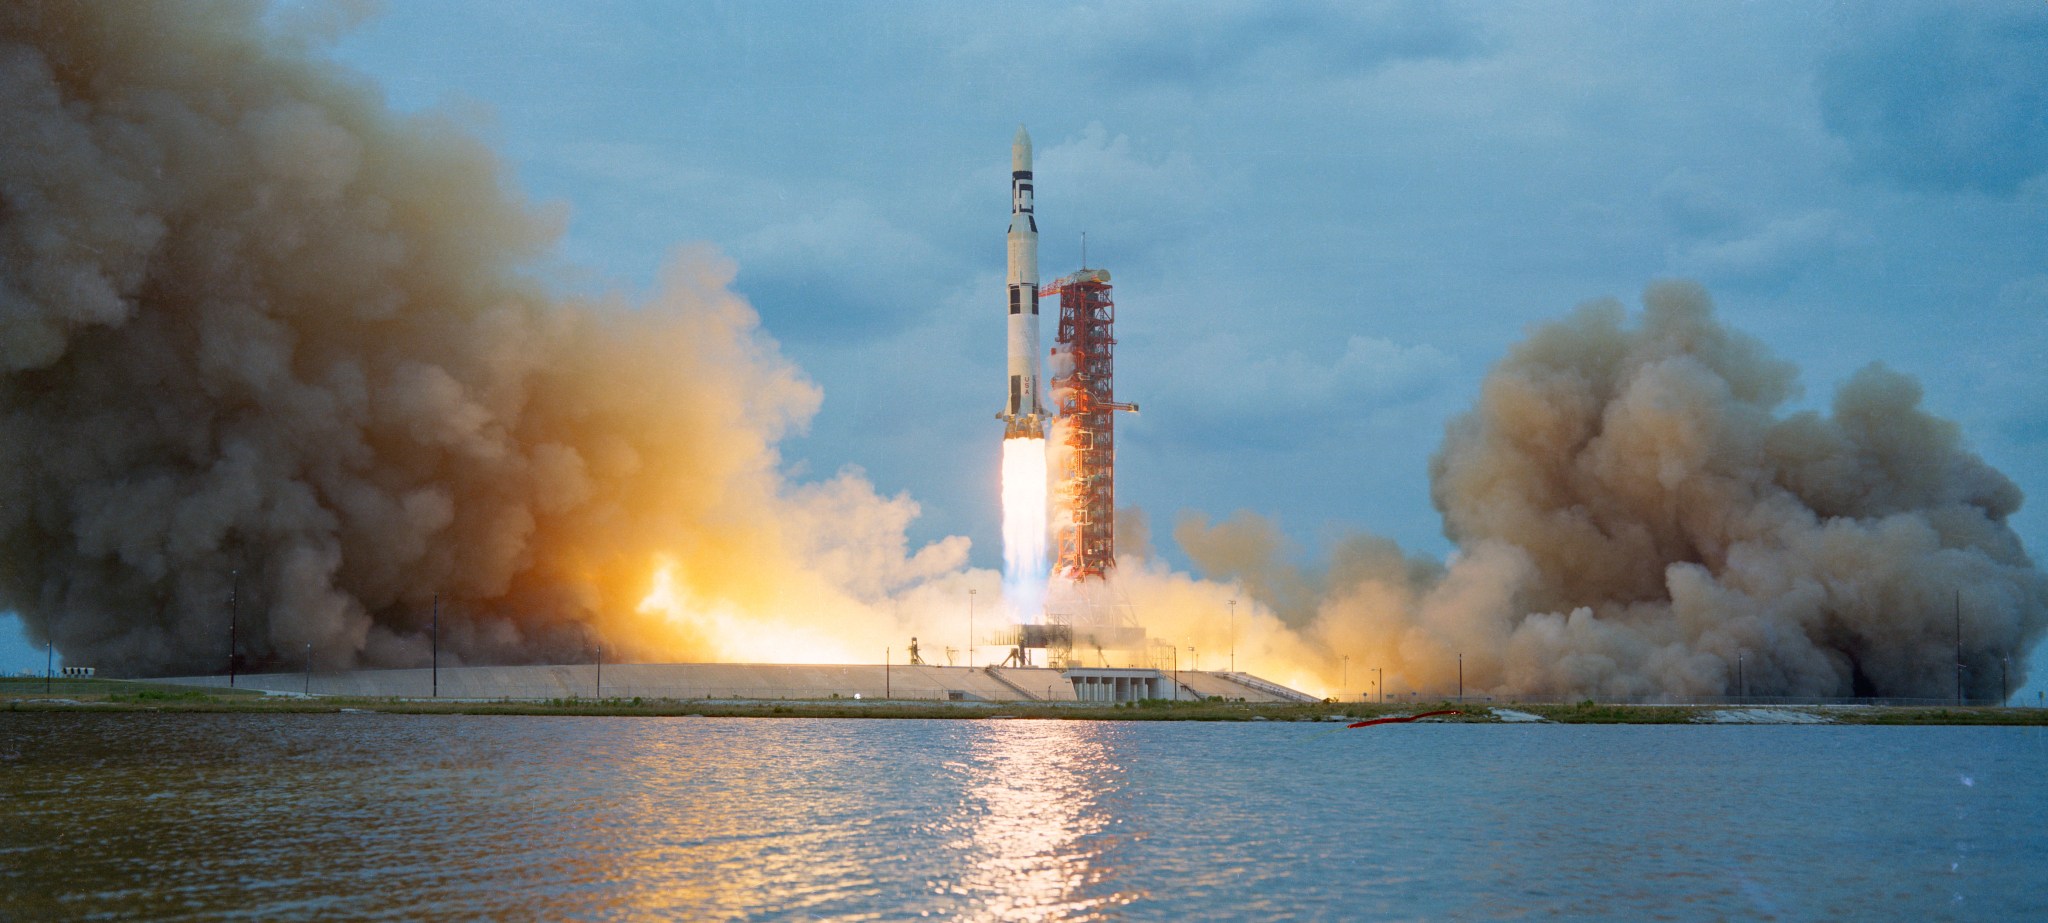 The Skylab space station launches from Kennedy Space Center in a fiery blaze on a Saturn V rocket on May 14, 1973.